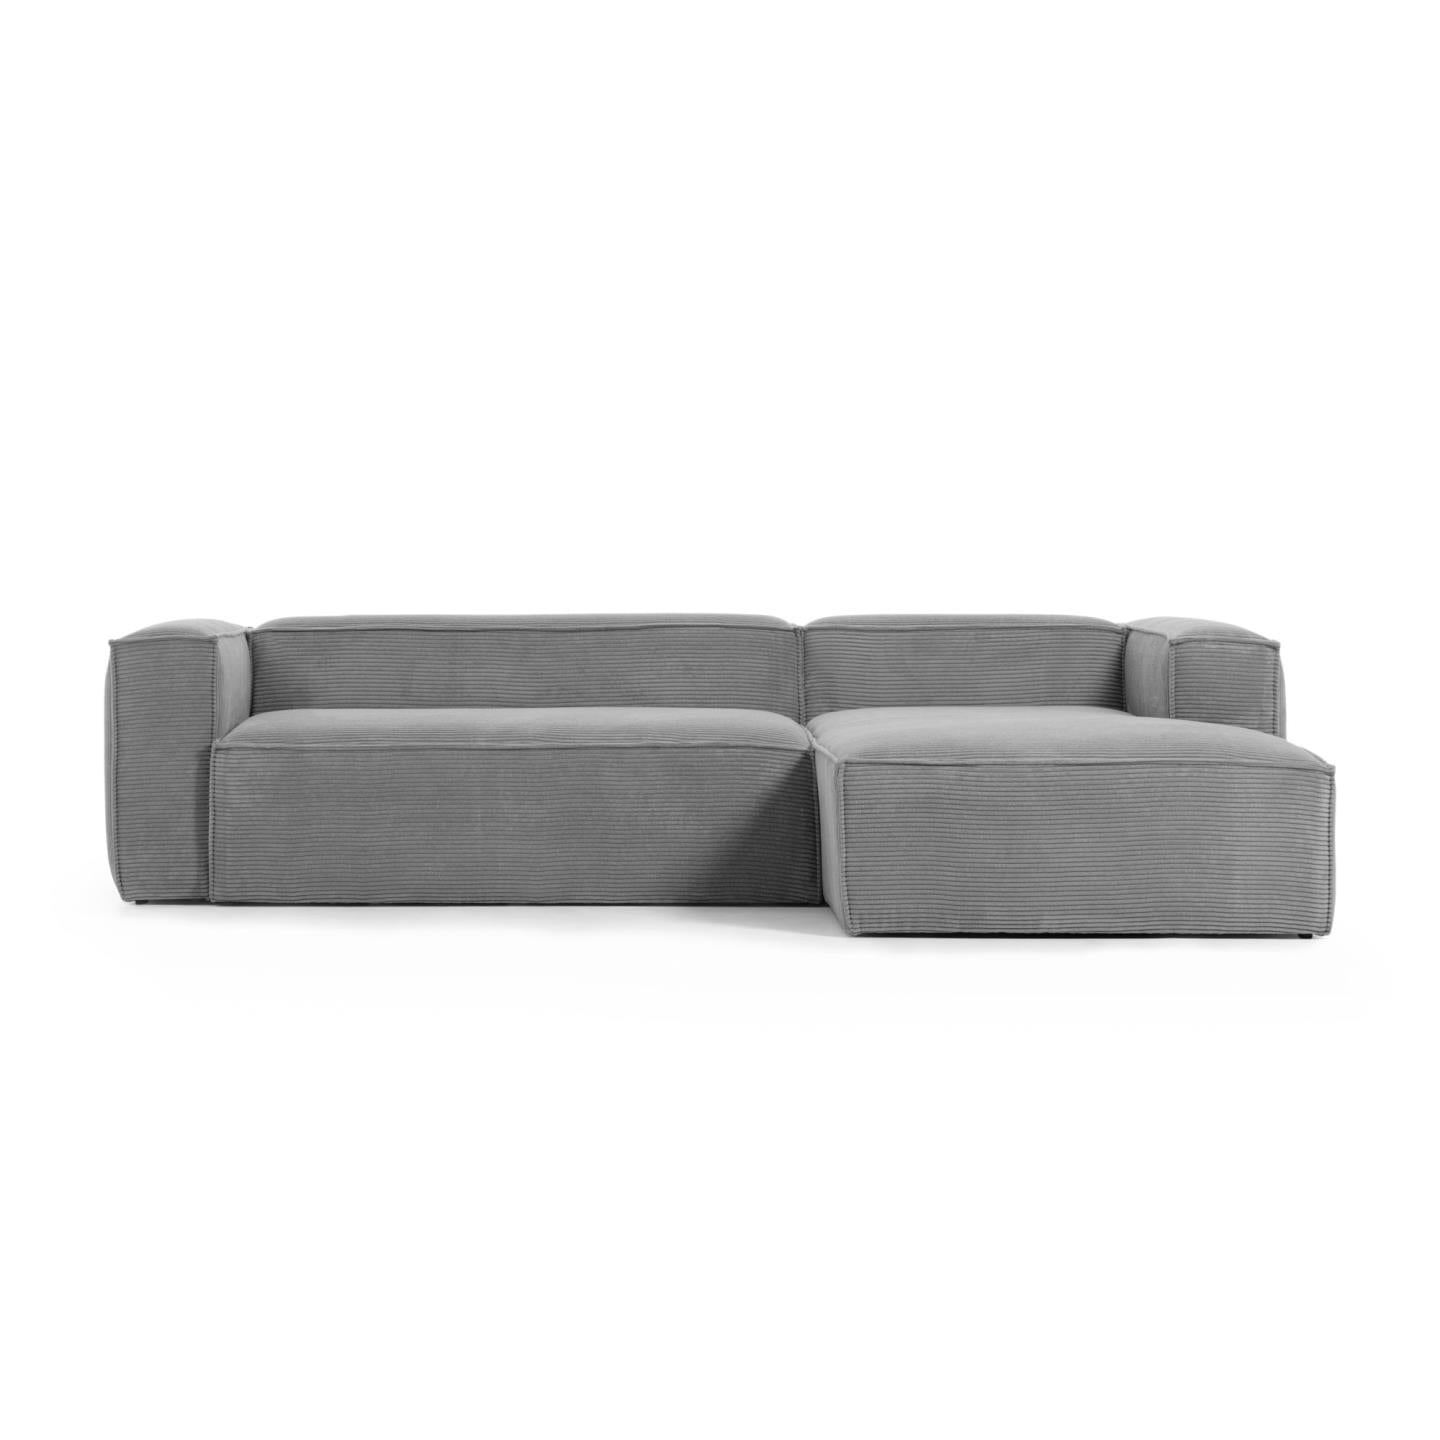 Blok 3 seater sofa with right side chaise longue in grey wide seam corduroy, 300 cm